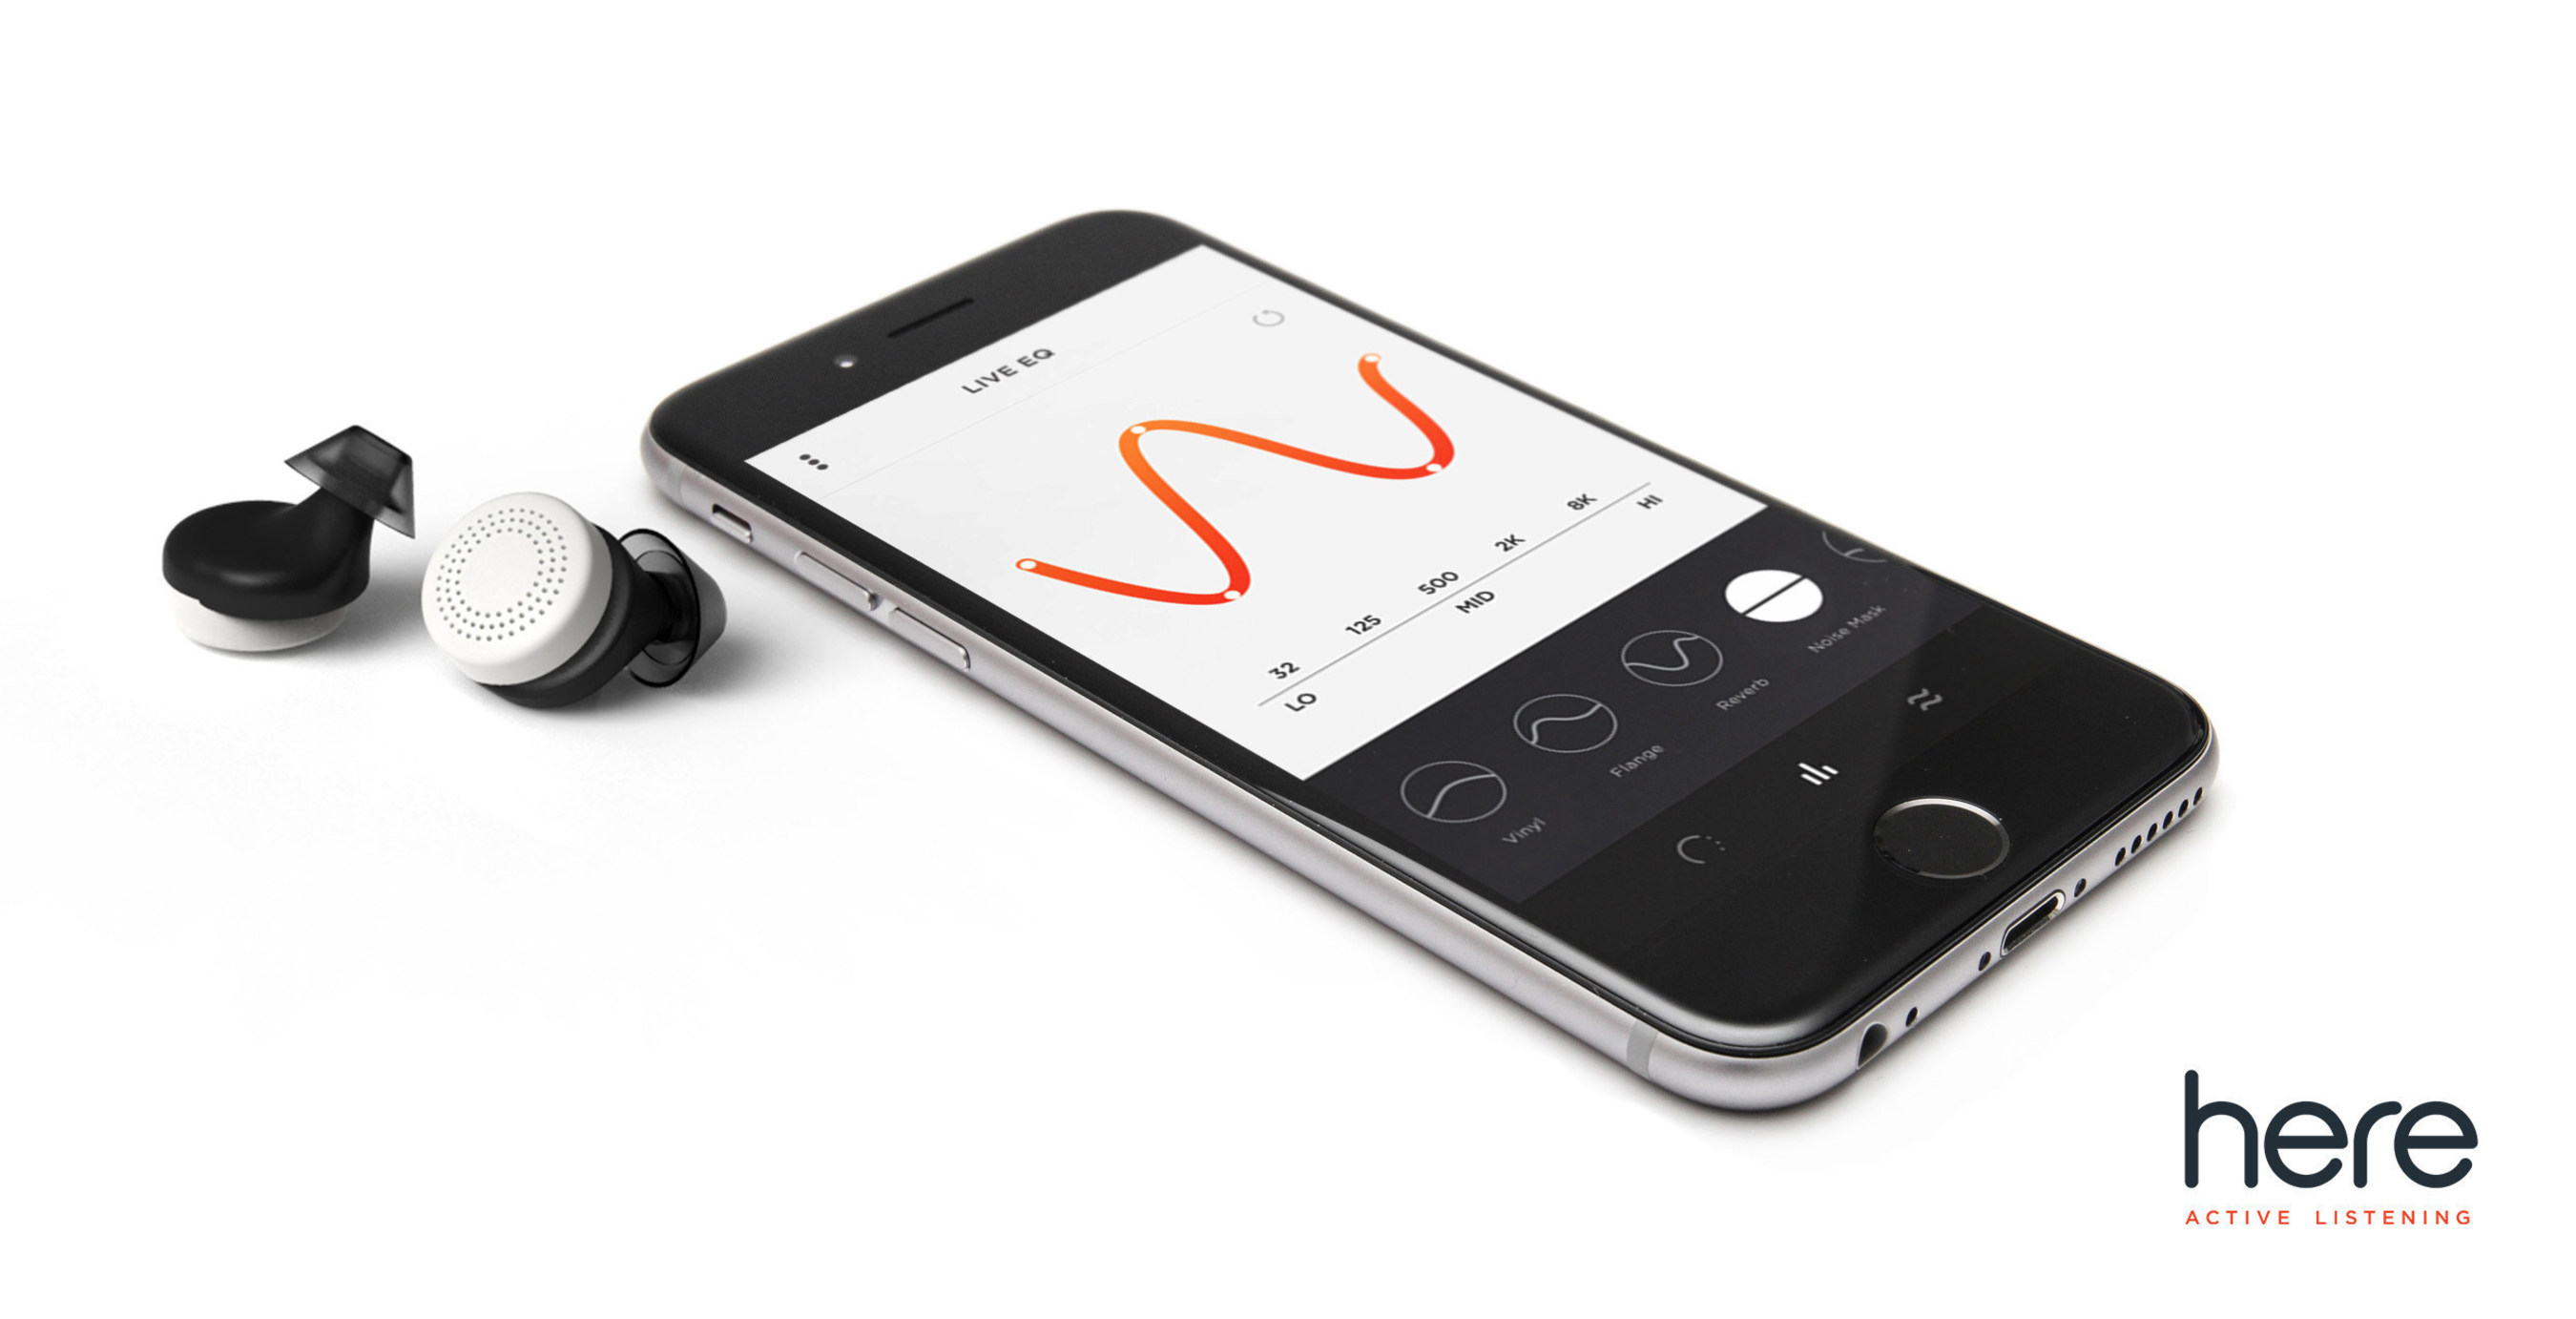 The Here Active Listening System(TM) is the first in-ear system designed to let you instantly control and personalize your live audio environment. Here consists of two wireless, in-ear buds and a connected smartphone app that give you control of any live listening experience.